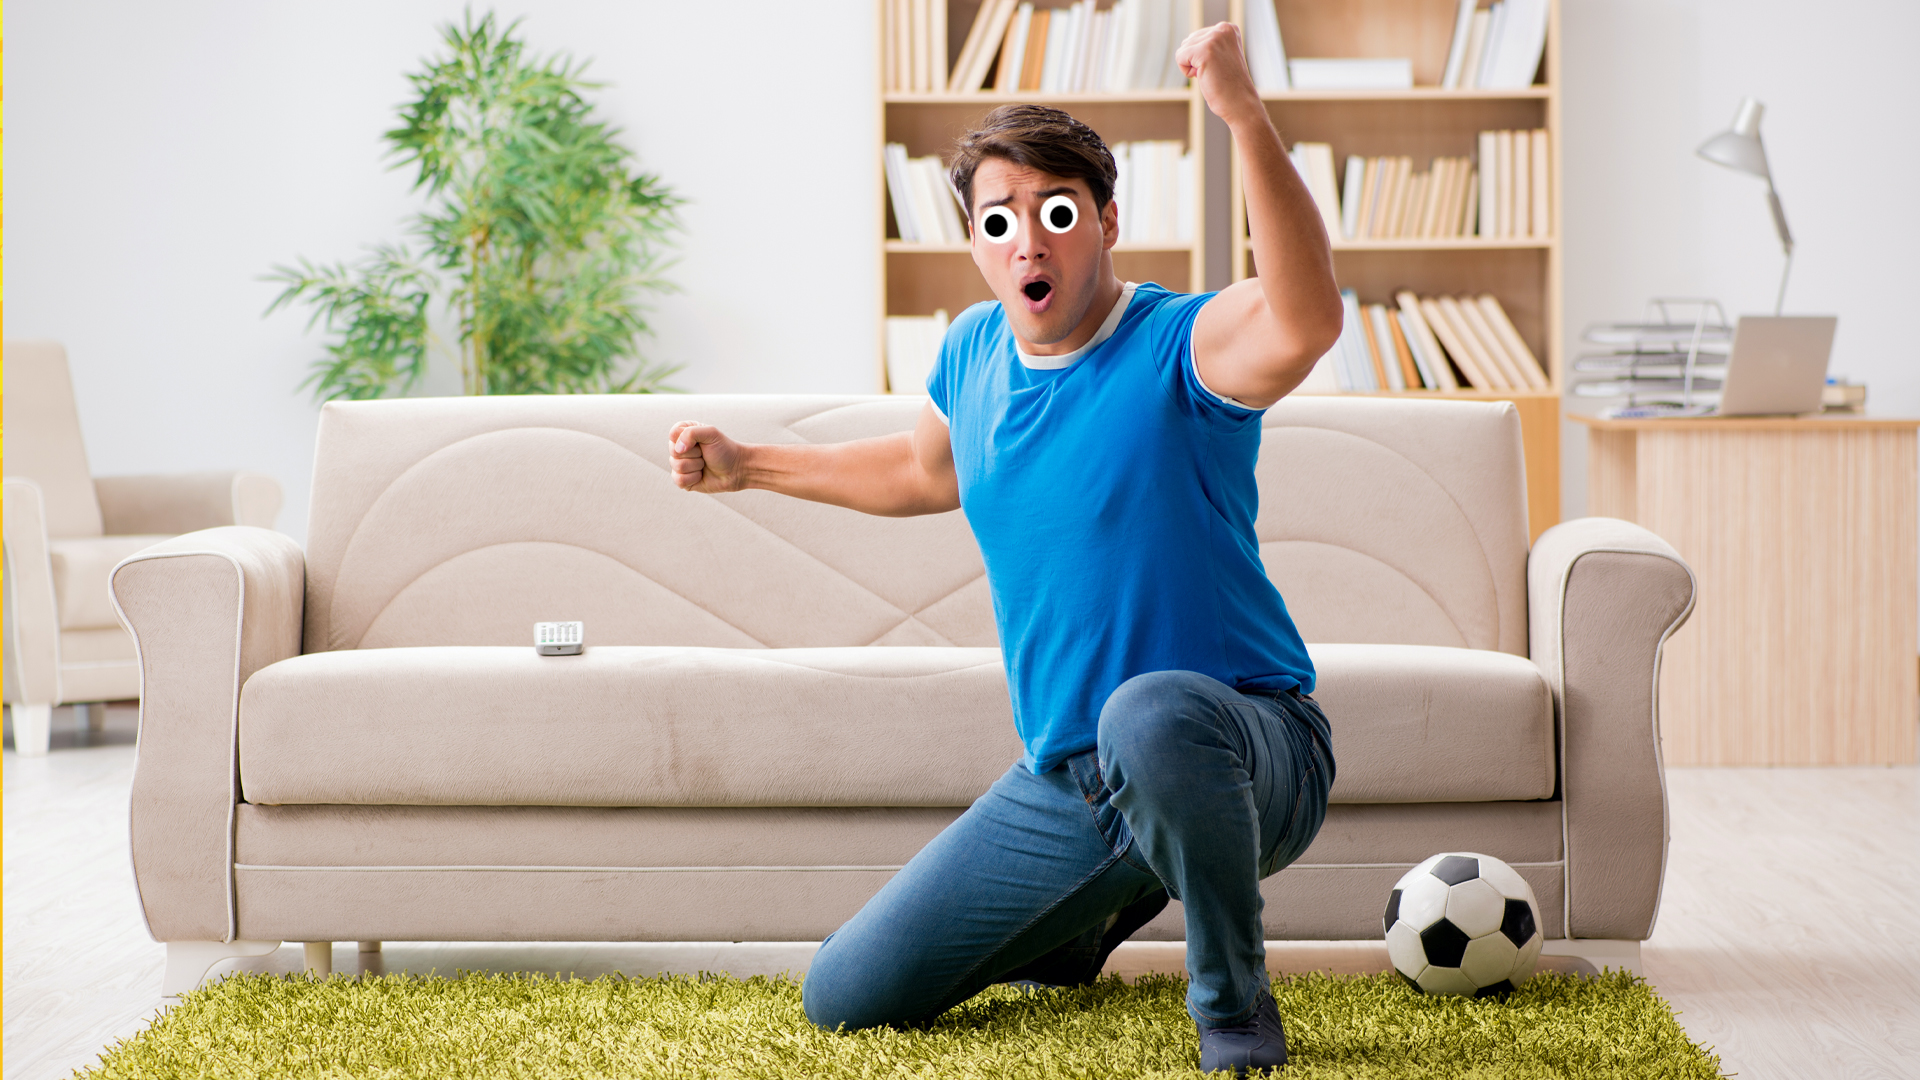 A football fan watching a game in their living room